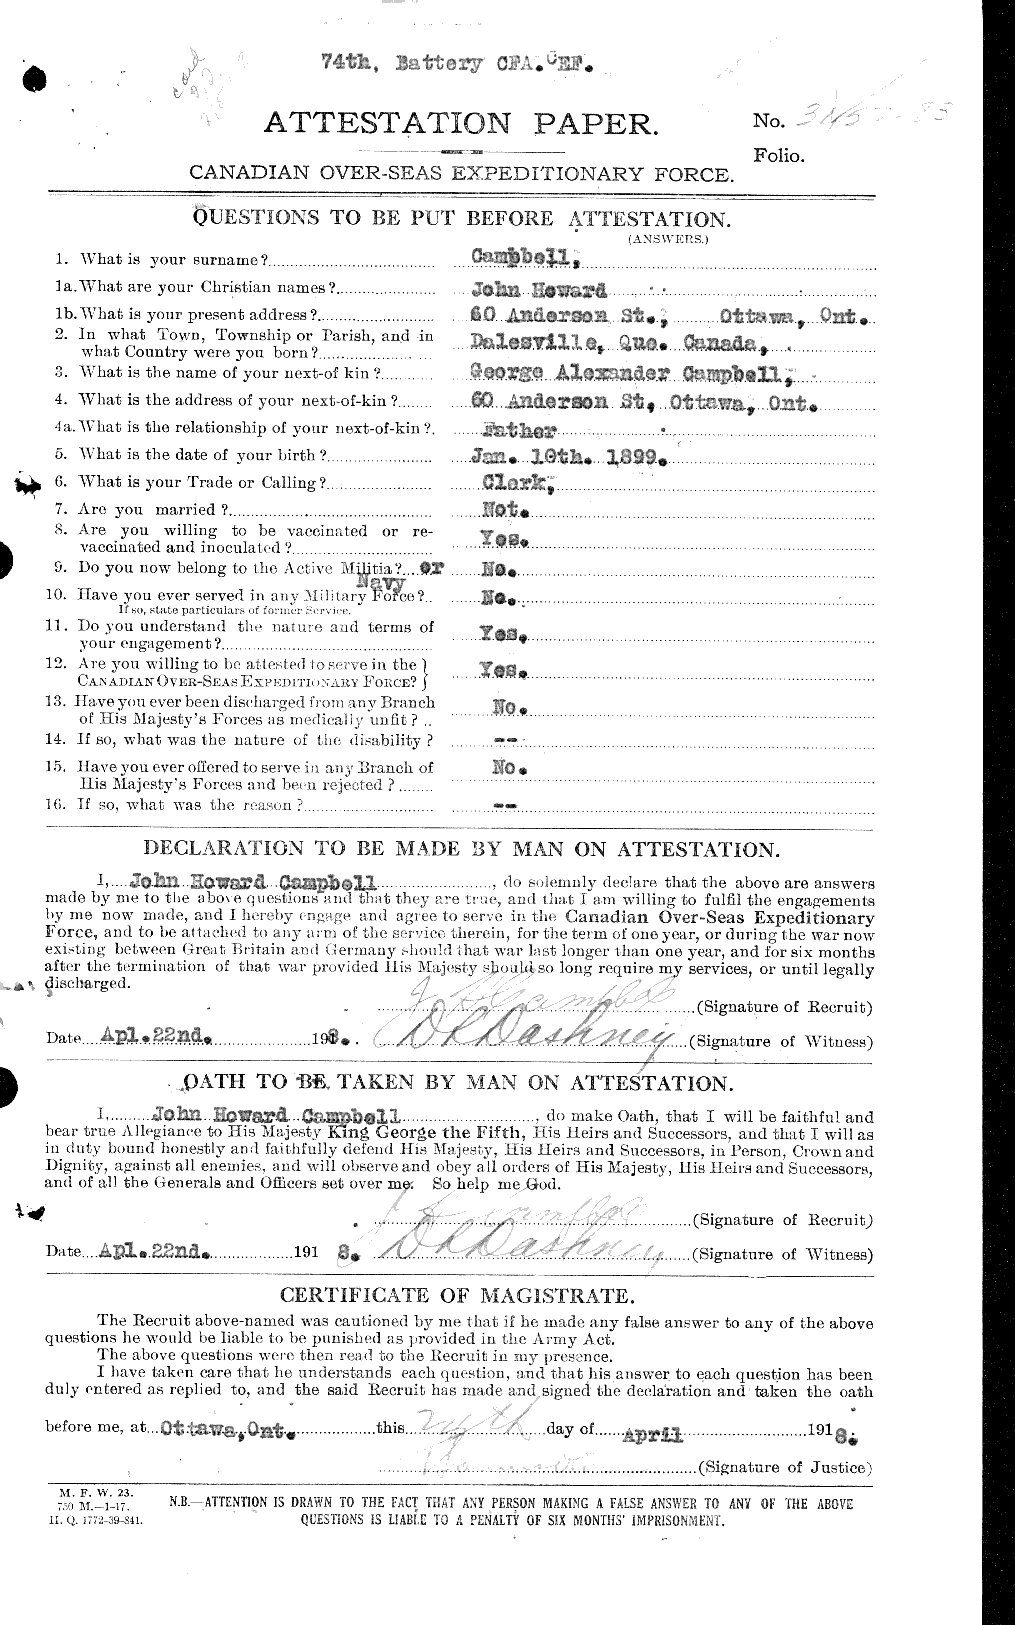 Personnel Records of the First World War - CEF 008536a